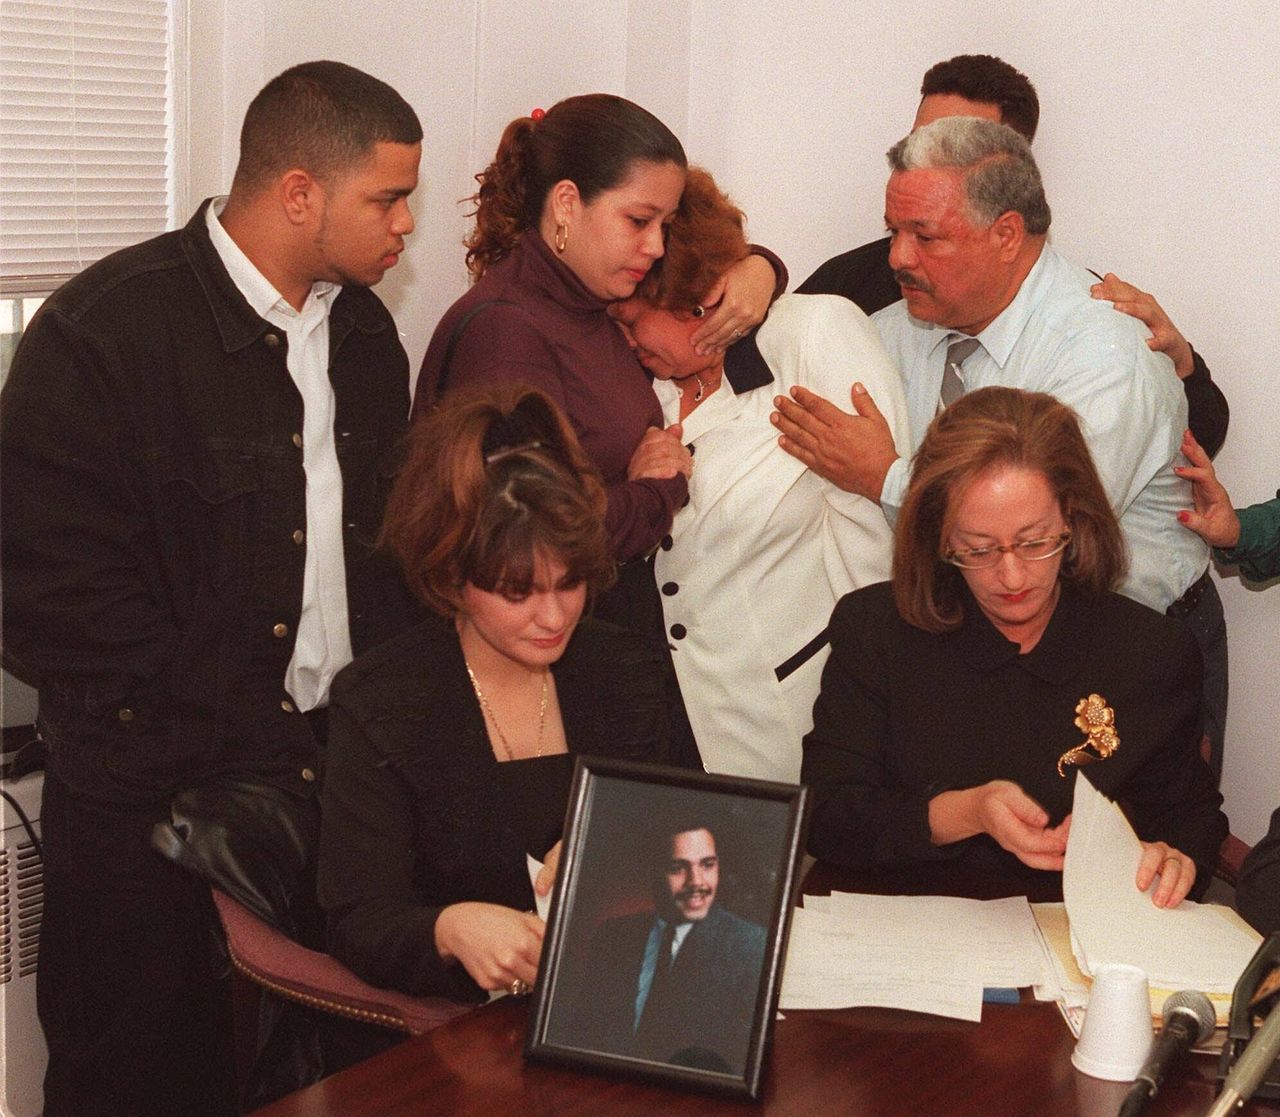 The family of Anthony Baez, who died in police custody on Dec. 22, react Dec. 29, 1994, during a news conference in New York in which they called for a grand jury investigation. Baez's widow, Miranda, is seated left, with Susan Karten, a lawyer, at right. Standing, from left, are Baez's brother David; sister, Elizabeth; mother, Iris; and father, Anthony Sr. (AP Photo/Luc Novovitch)